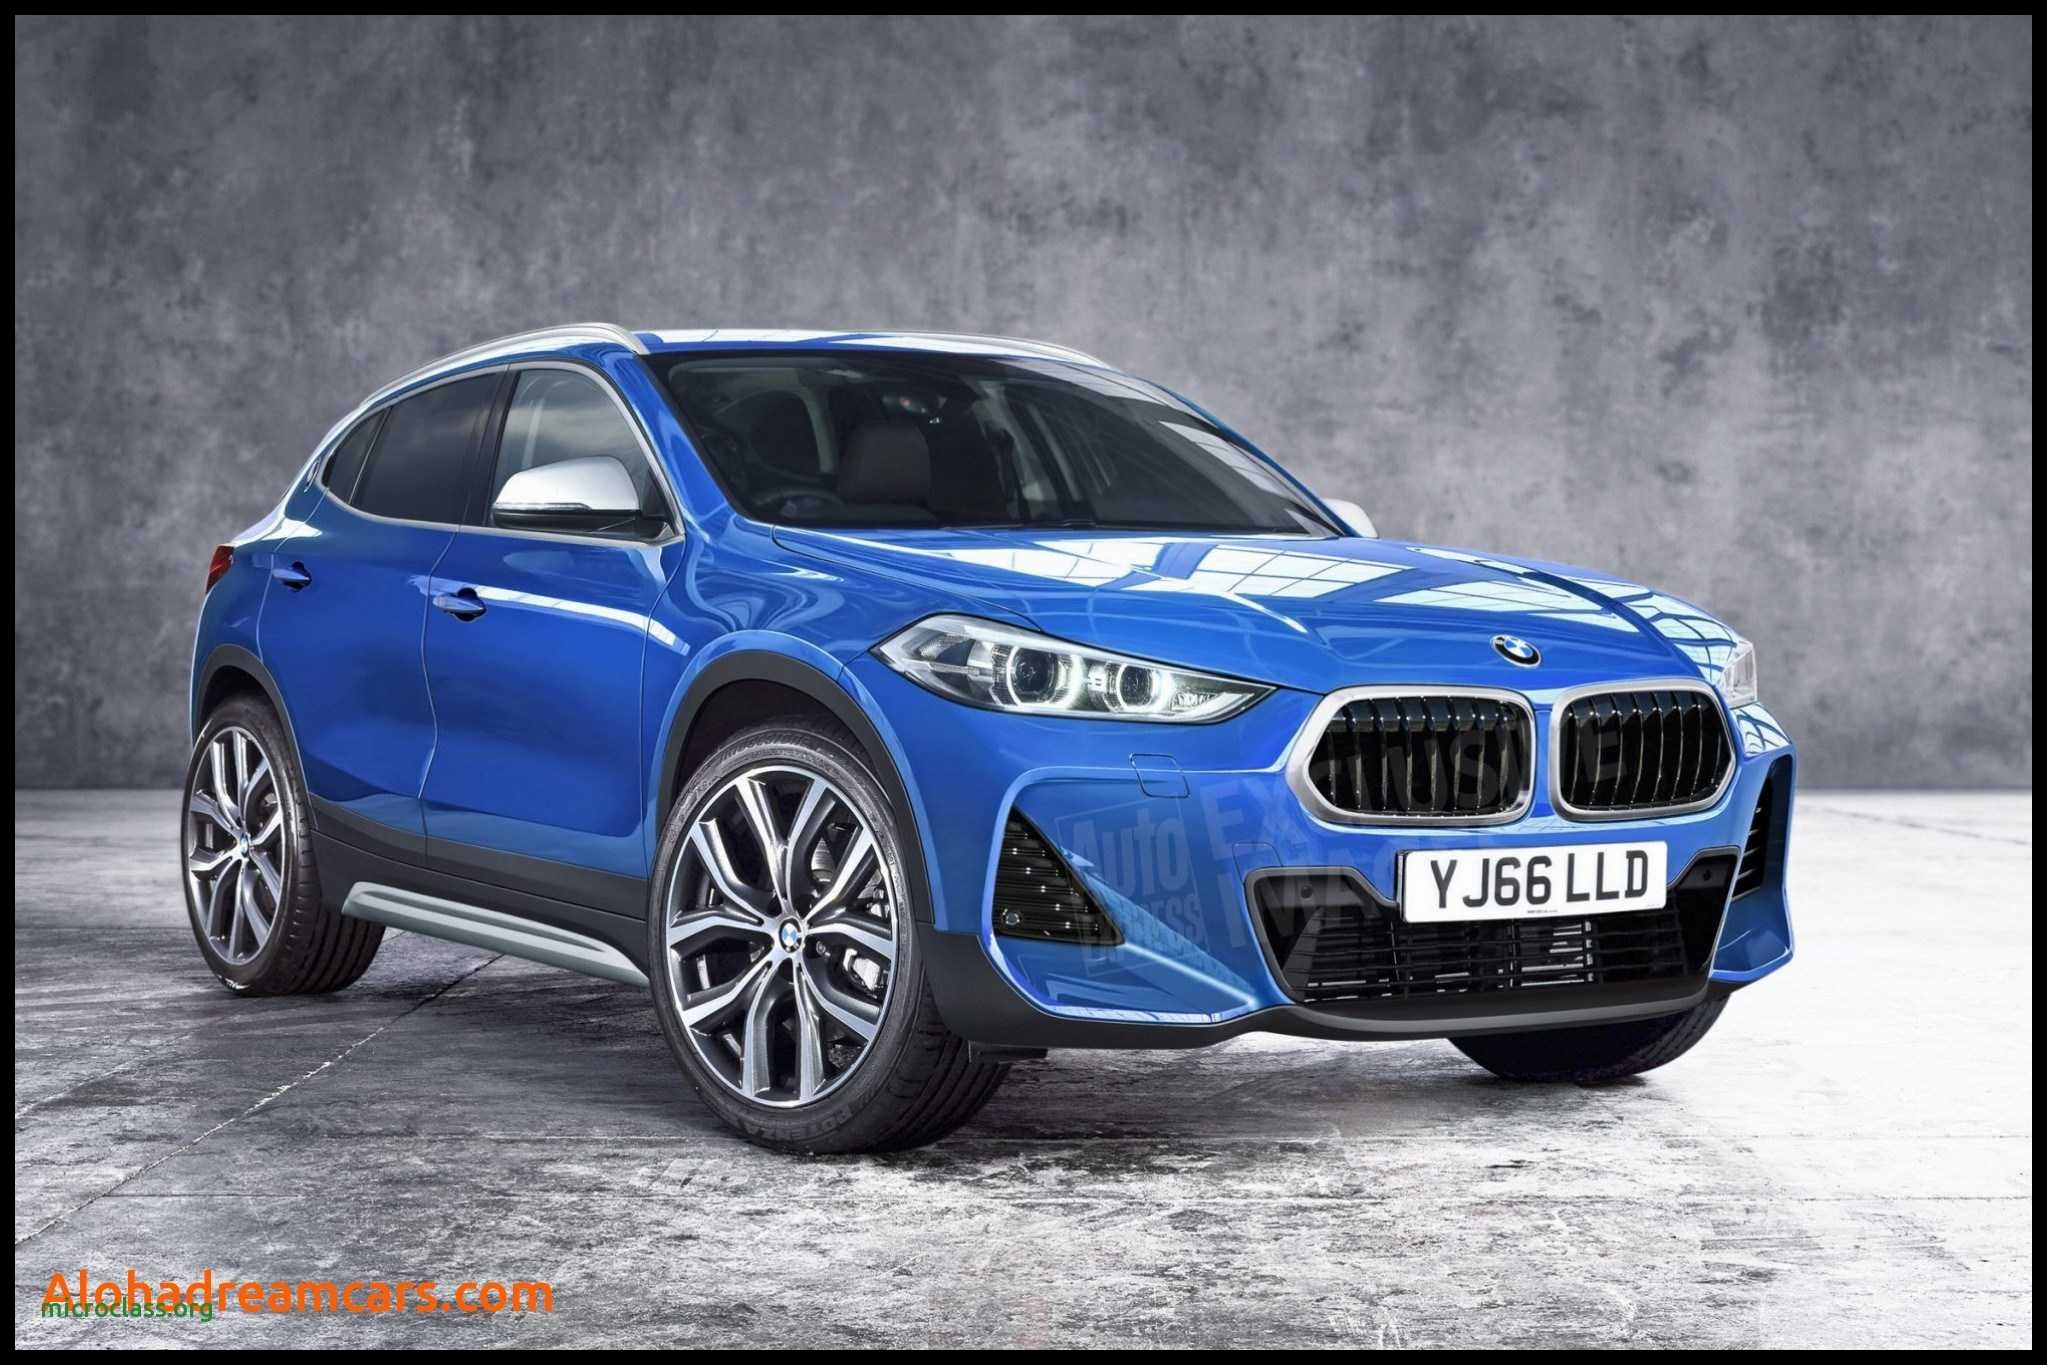 2019 X1 Bmw Specs and Review Bmw Interior New Bmw X1 E84 2 0d Lovely